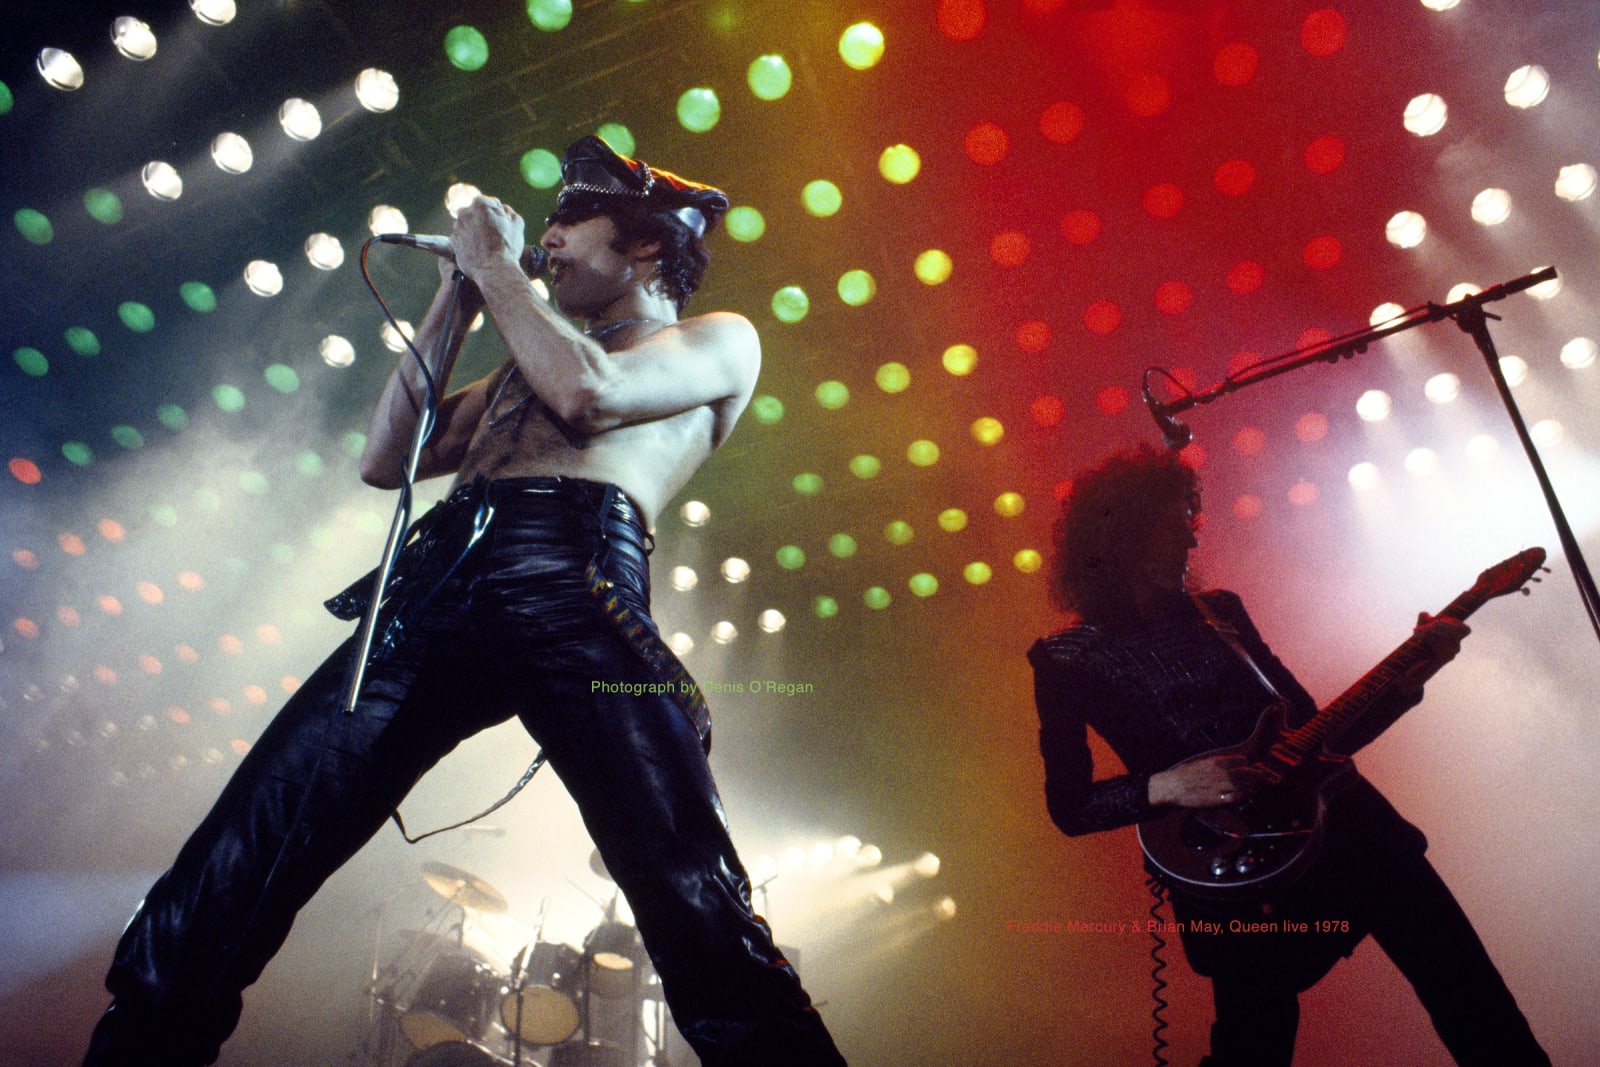 QUEEN, Freddie and Brian live, 1978